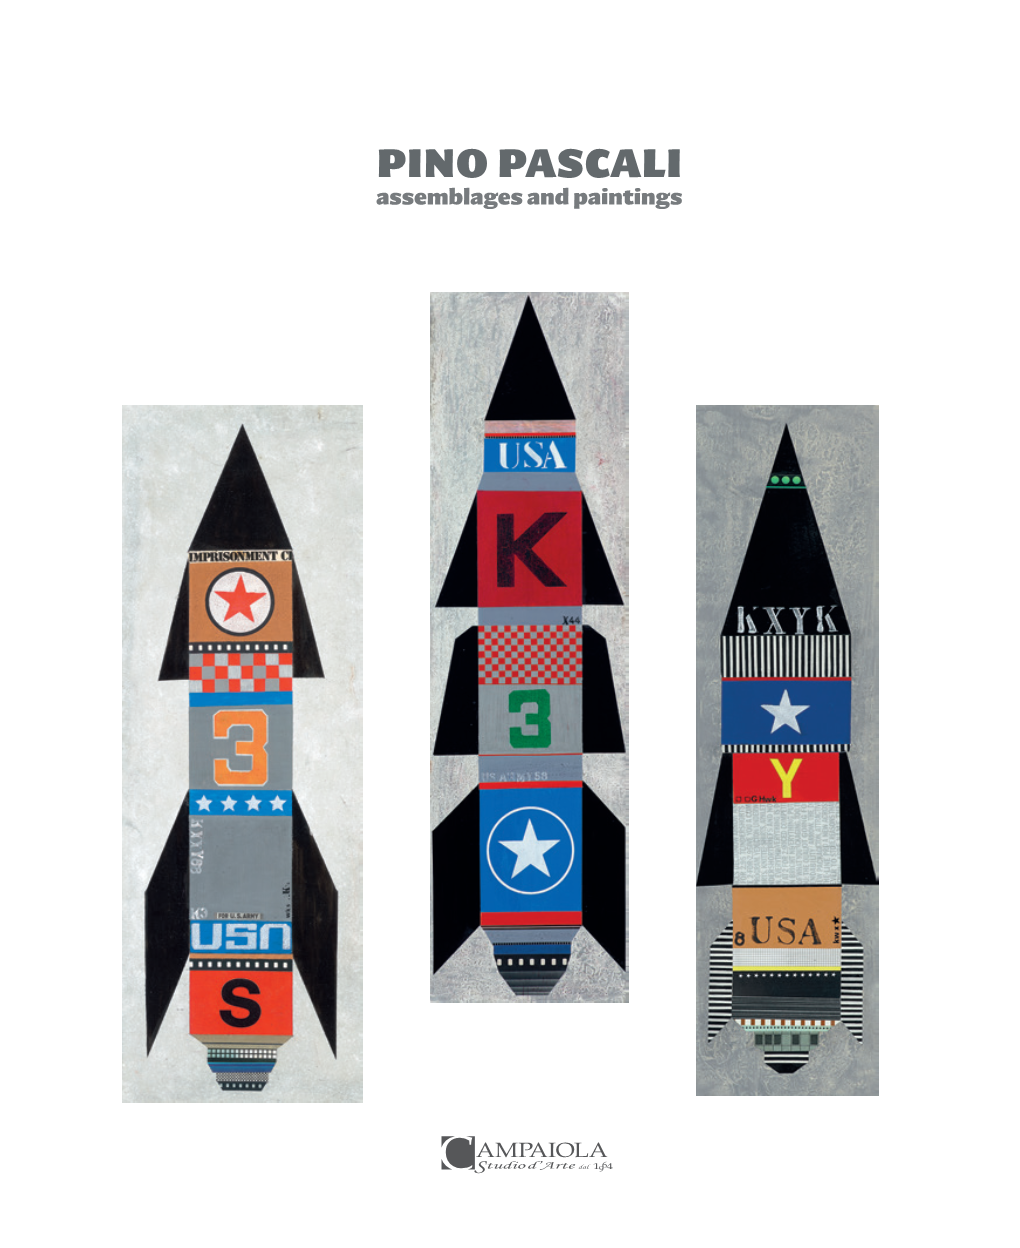 PINO PASCALI Assemblages and Paintings